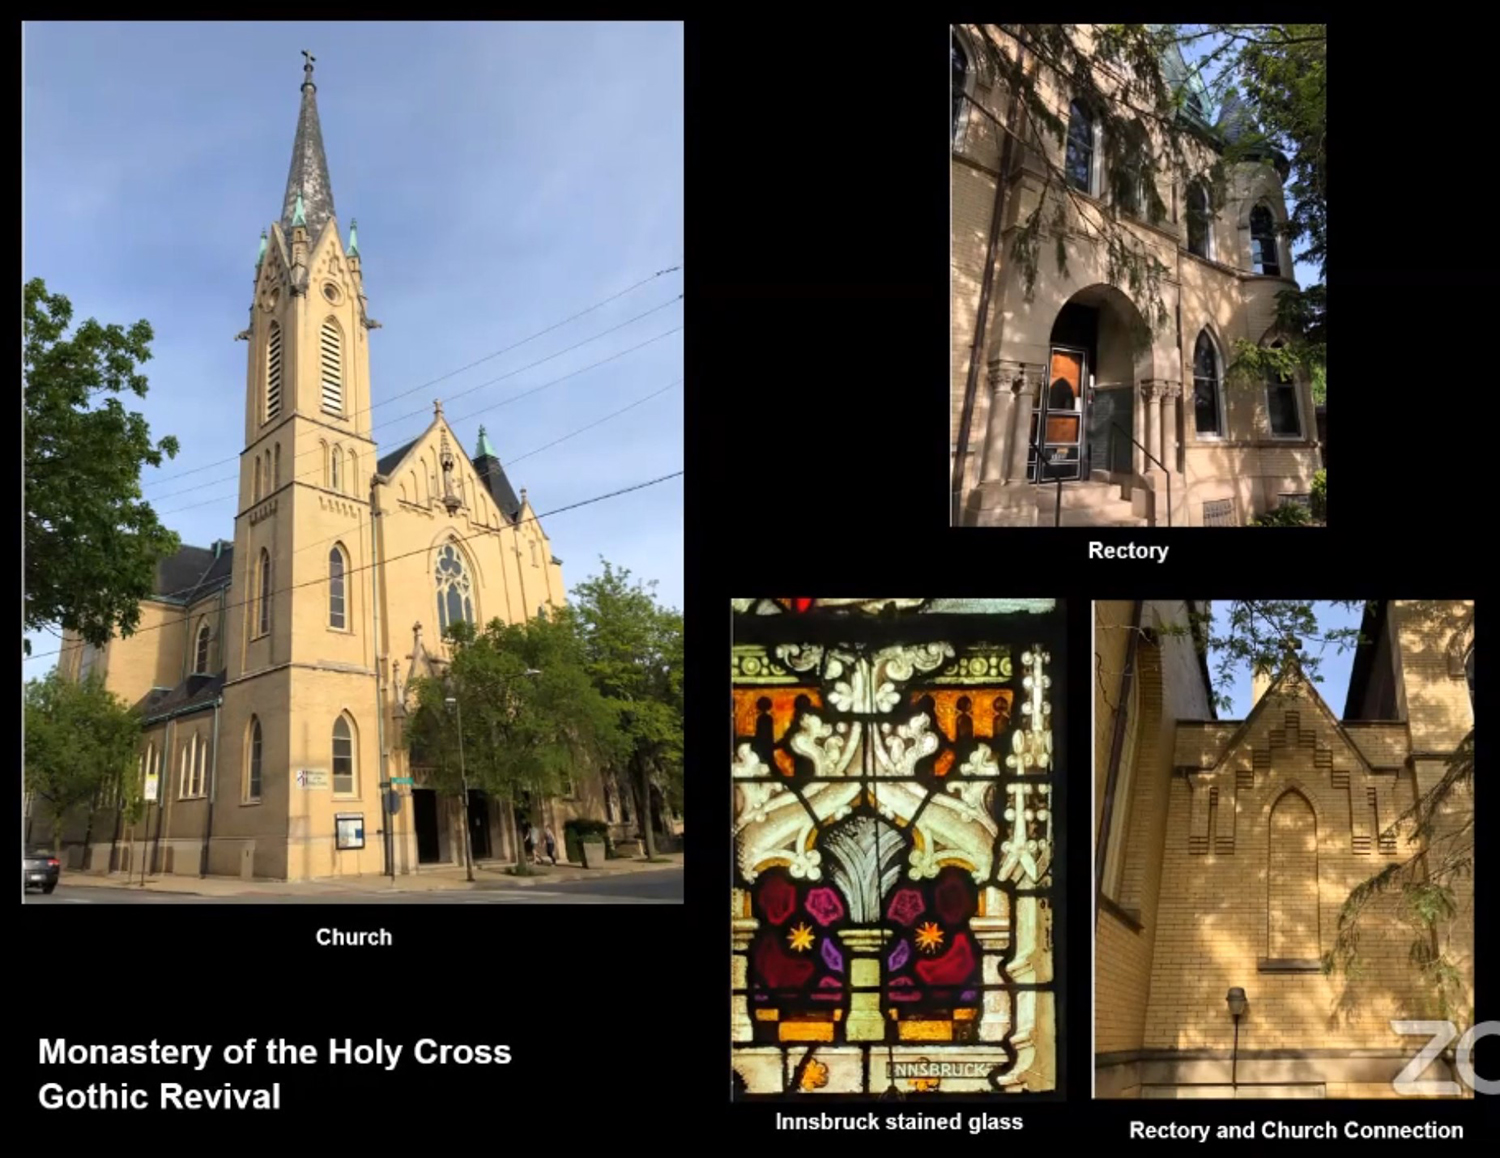 Images of Monastery of the Holy Cross. Image by CCL